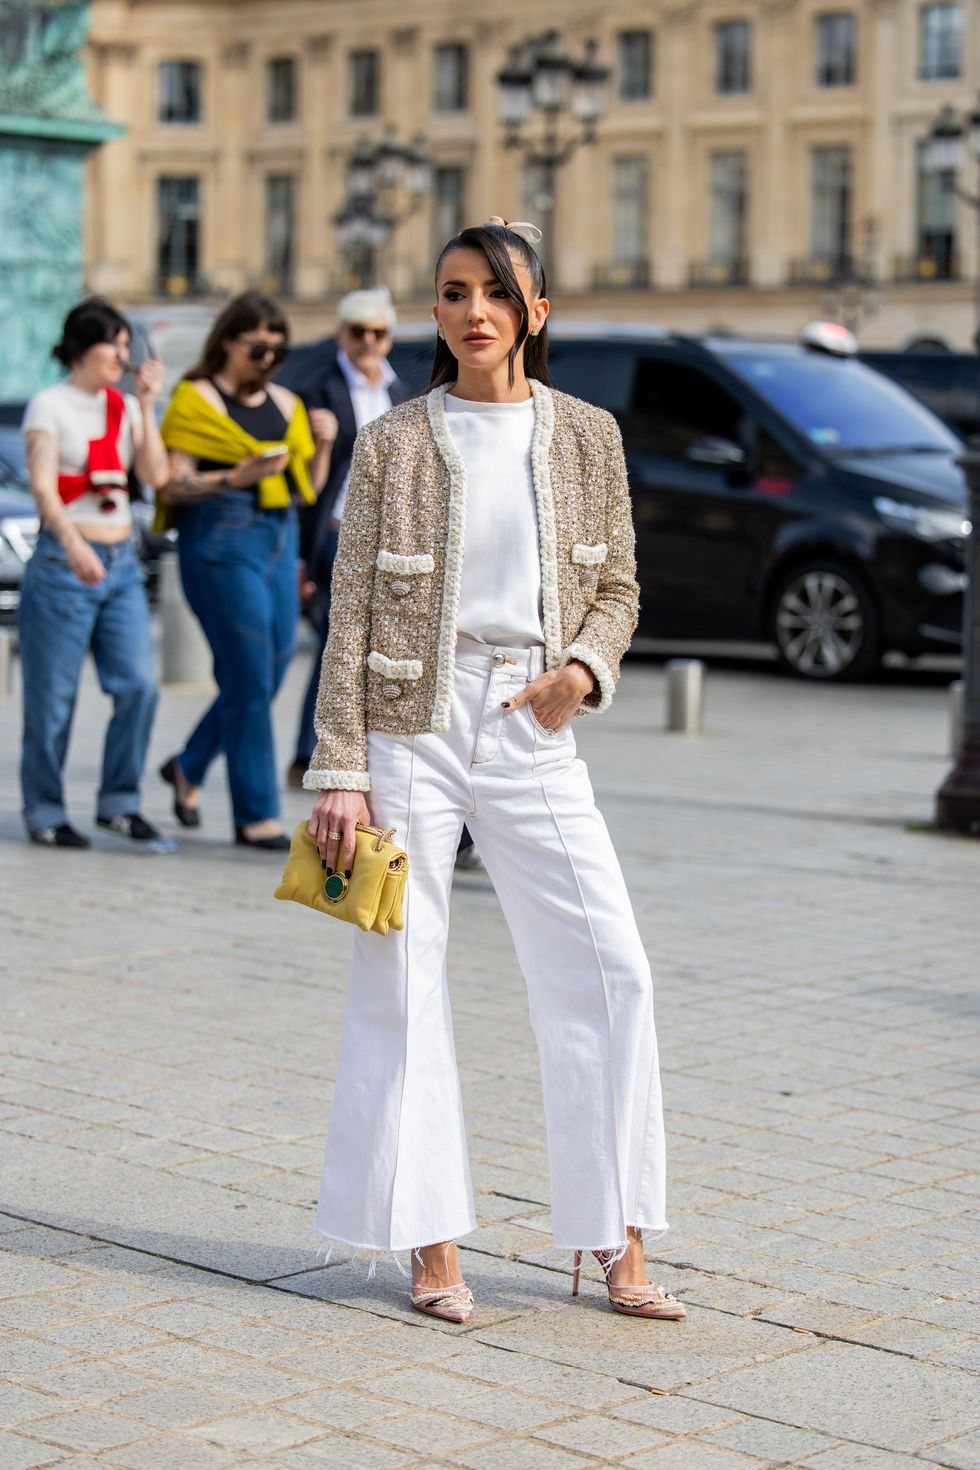 paris, france september 29 alexandra pereira wears cardigan, white flared pants, yellow bag, head band, shirt outside giambattista valli during the womenswear springsummer 2024 as part of paris fashion week on september 29, 2023 in paris, france photo by christian vieriggetty images